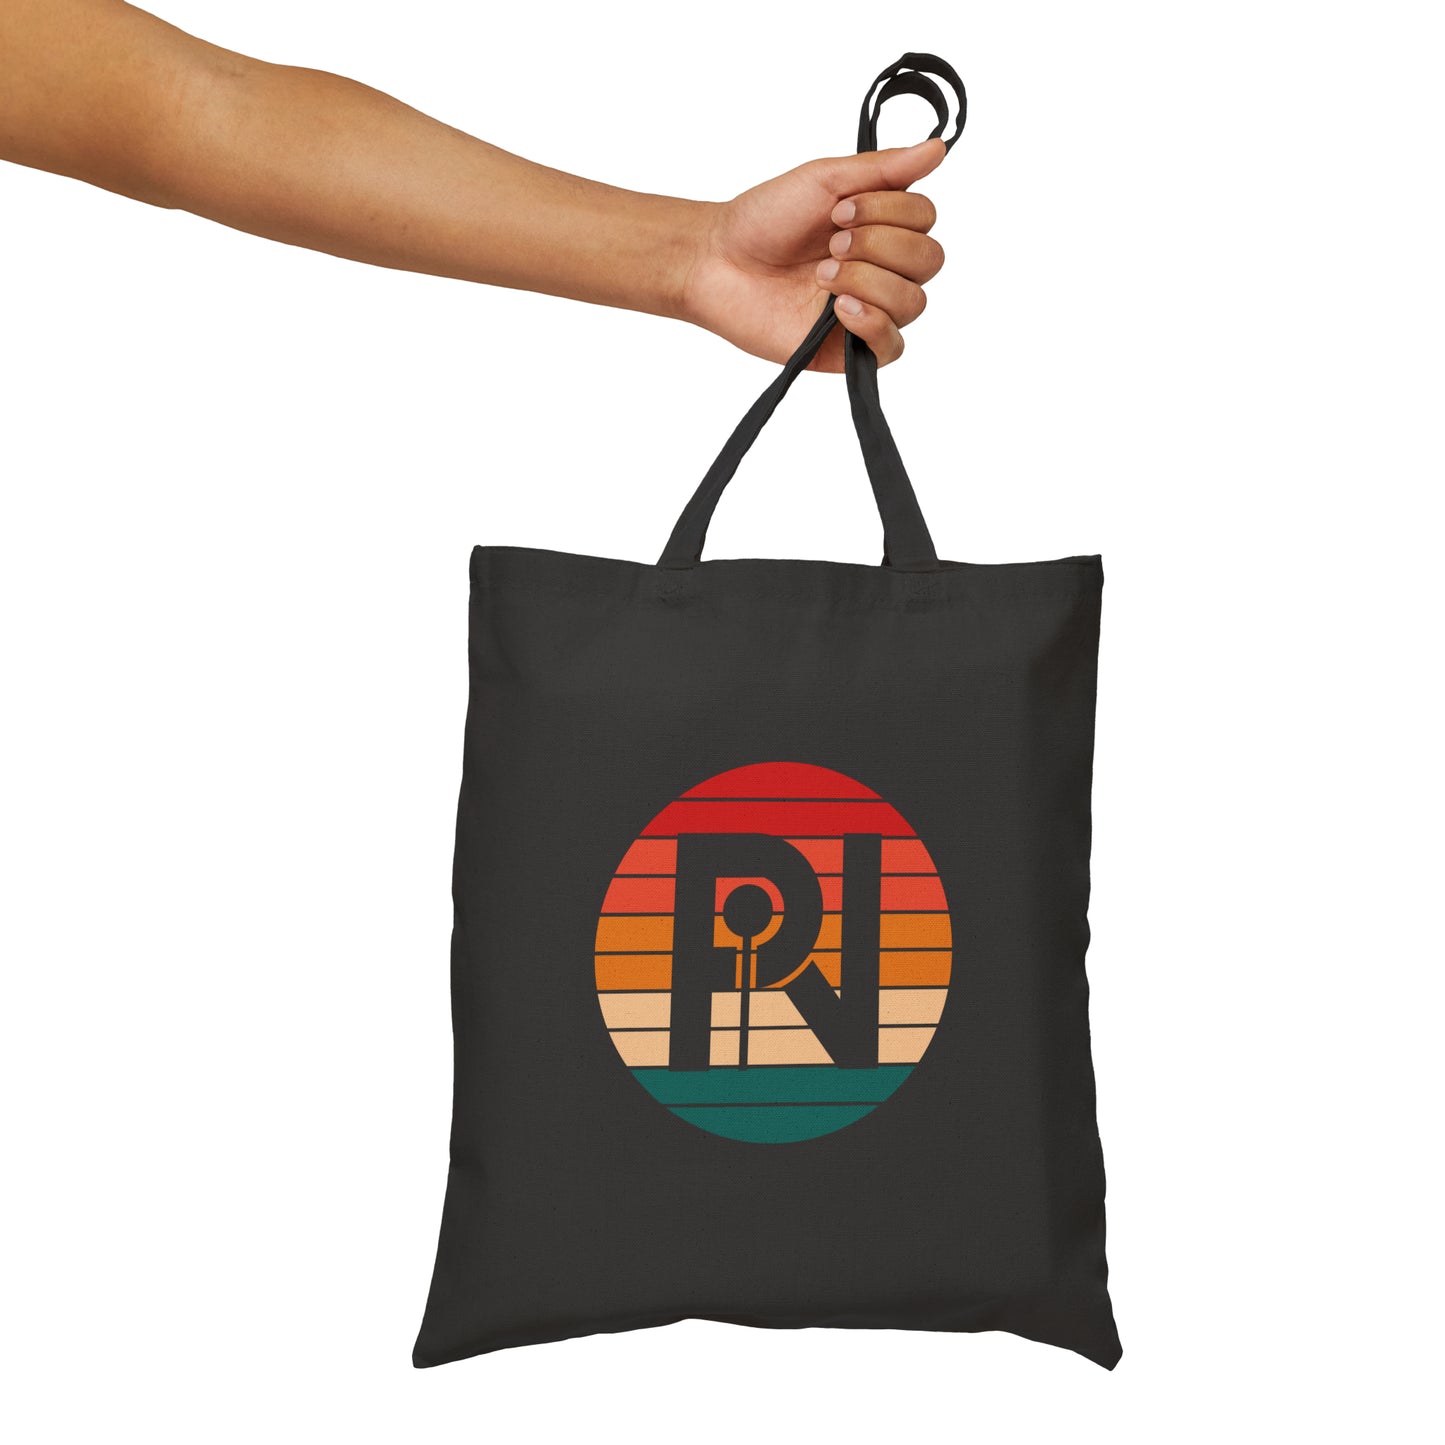 Cotton Canvas Tote Bag (PIN Sunset)